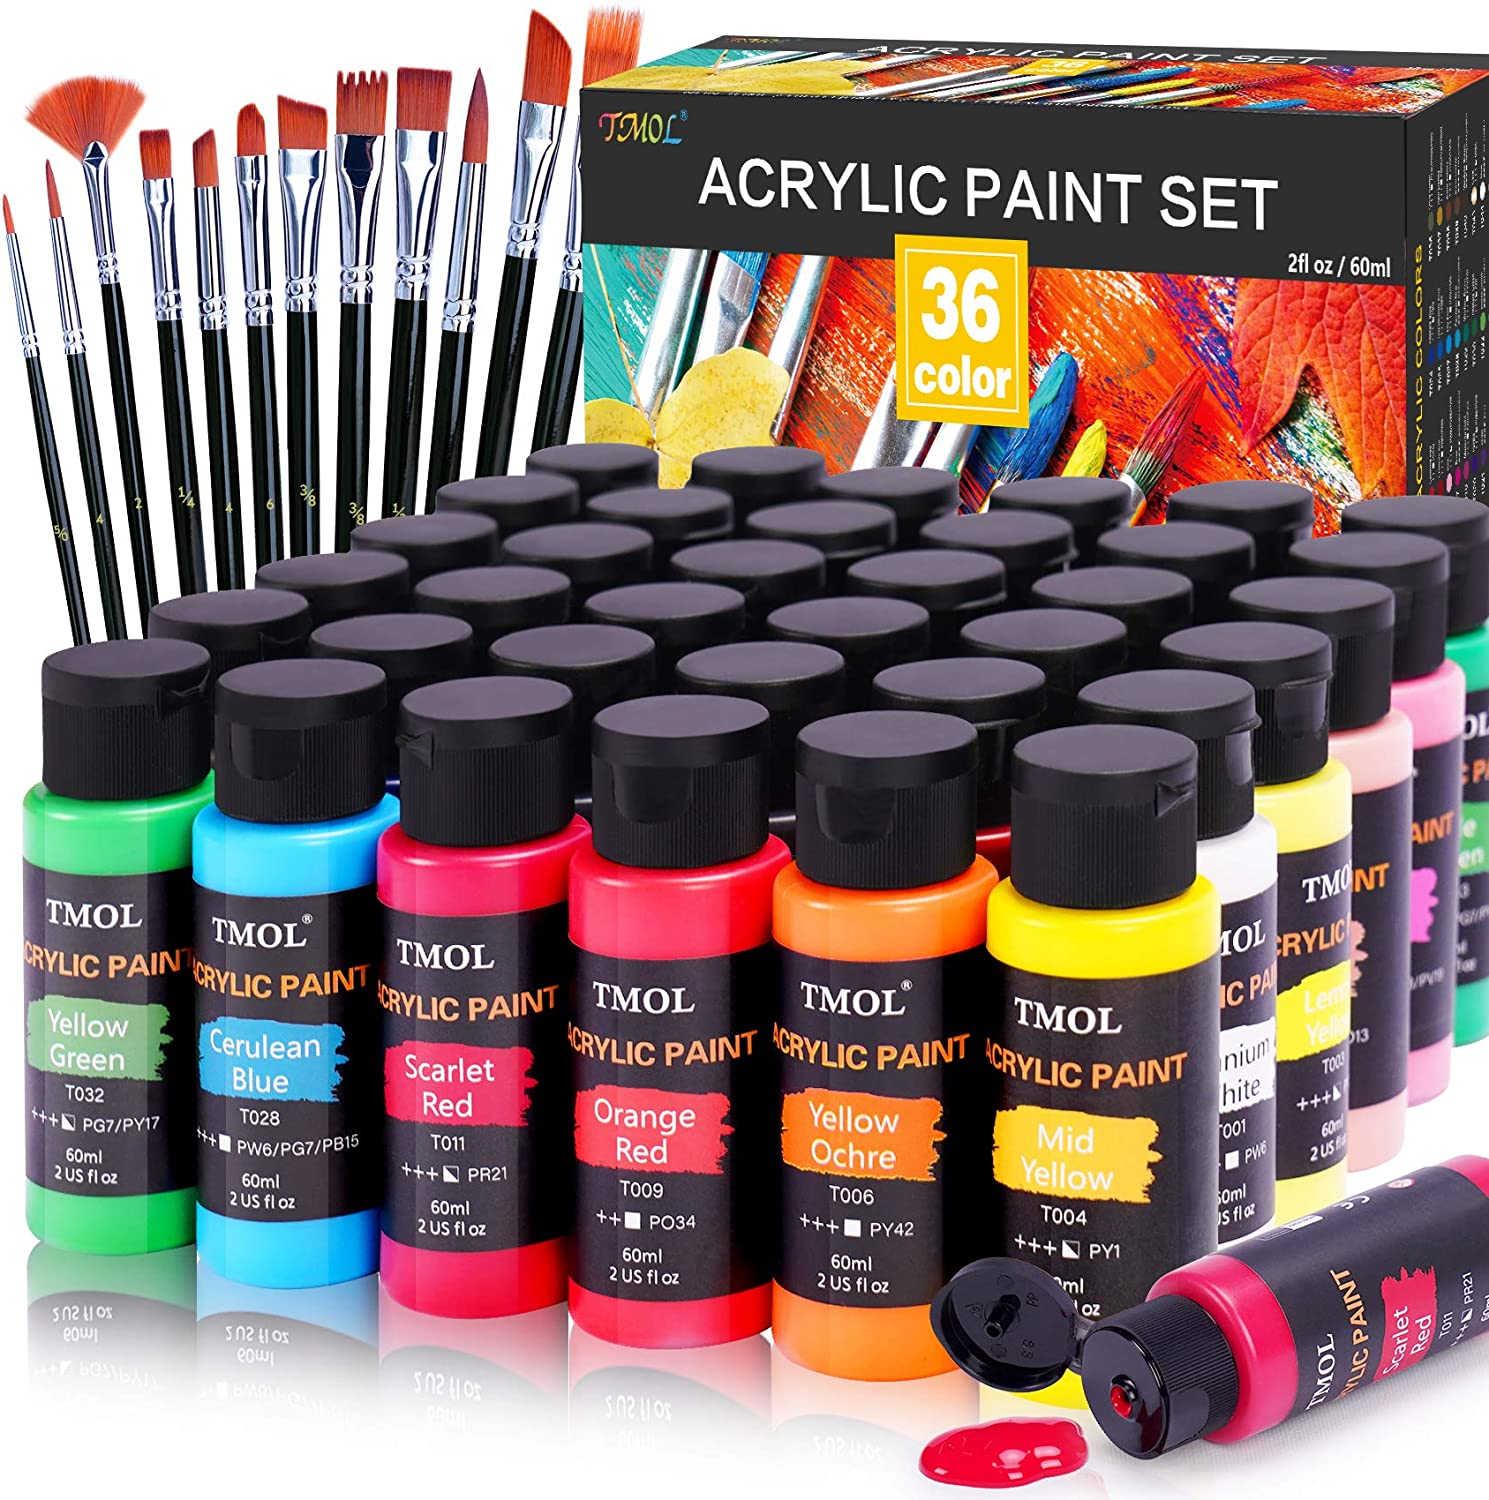 Tips to Buy Safe Art Supplies for Children in New Zealand